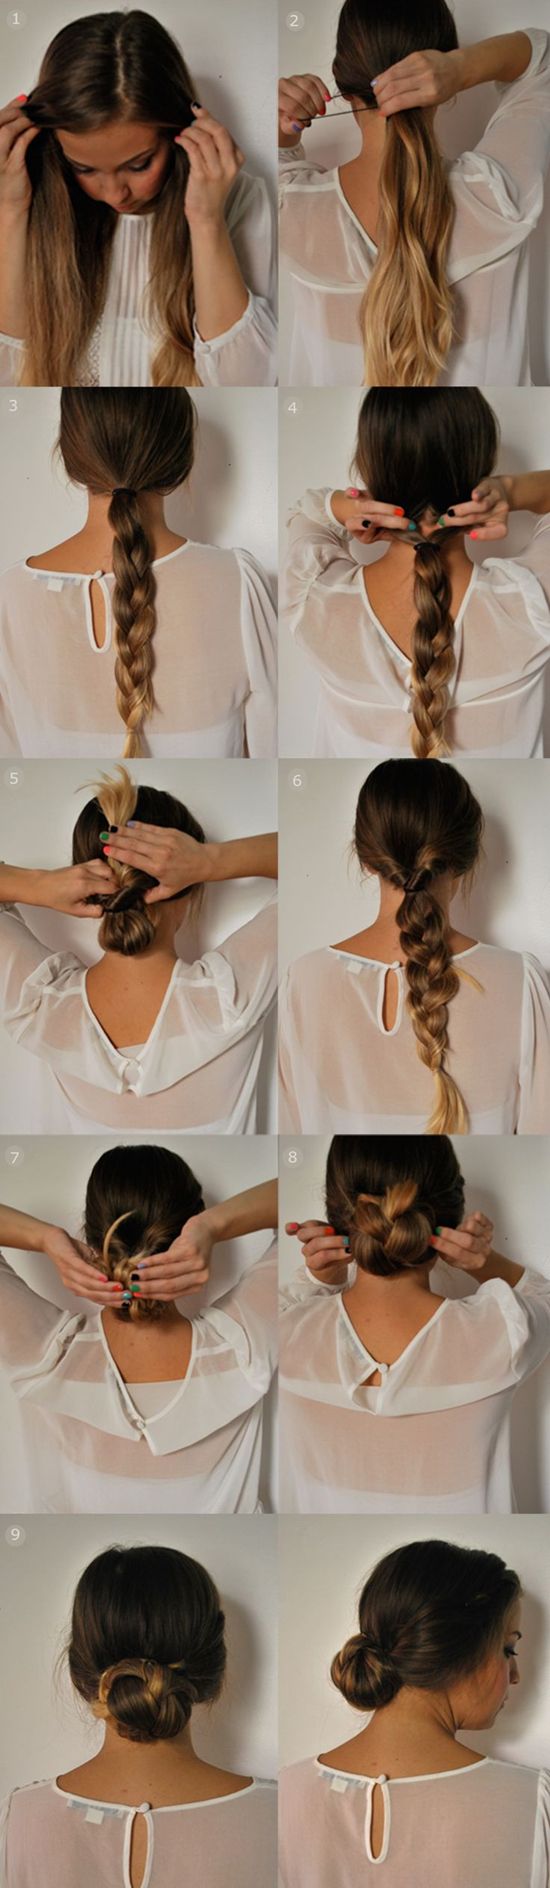 quick-and-easy-long-hairstyles-16_7 Quick and easy long hairstyles